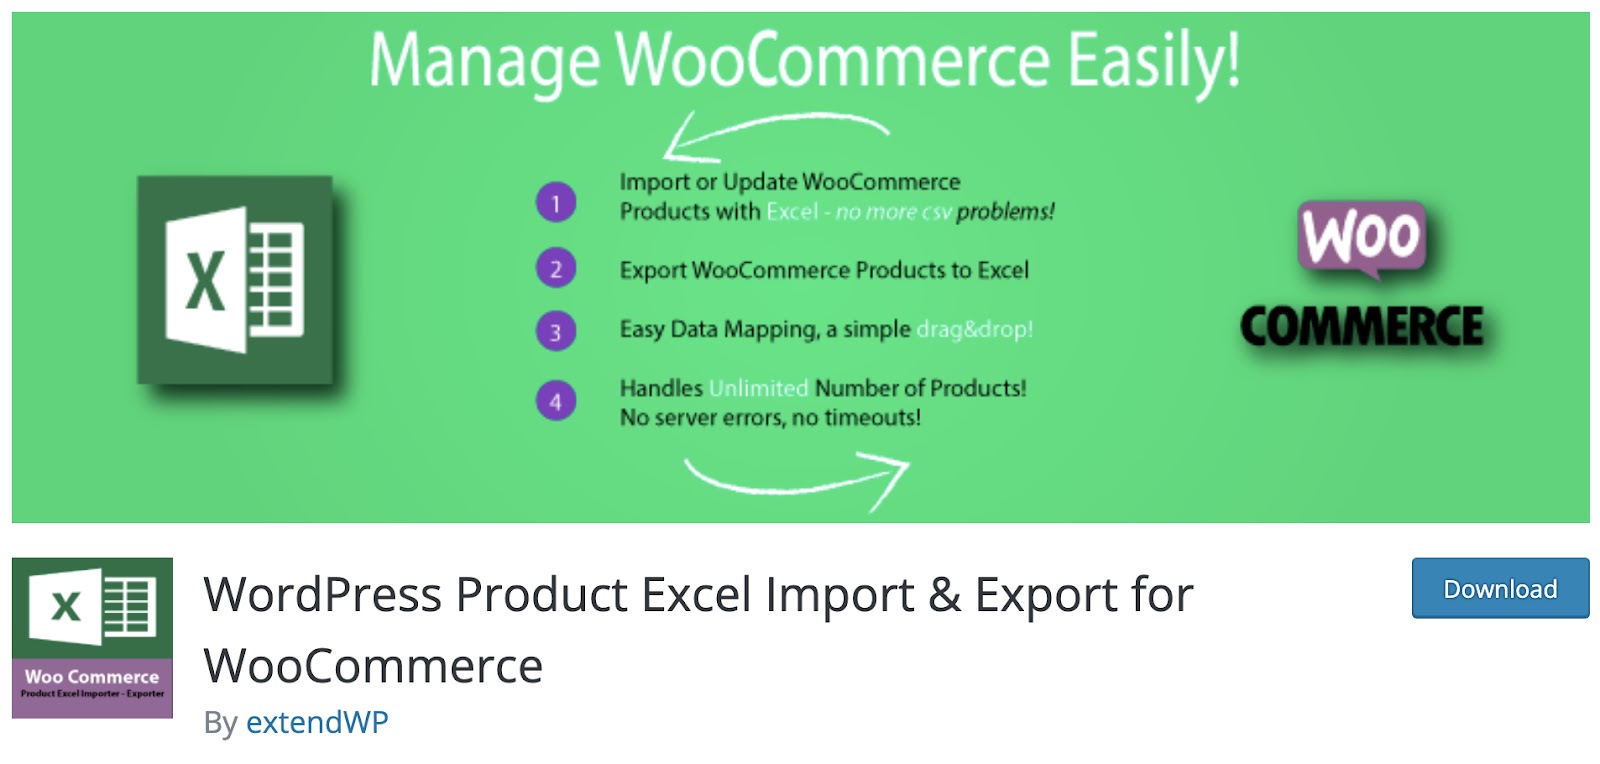 wordpress-product-excel-import_export-for-woocommerce